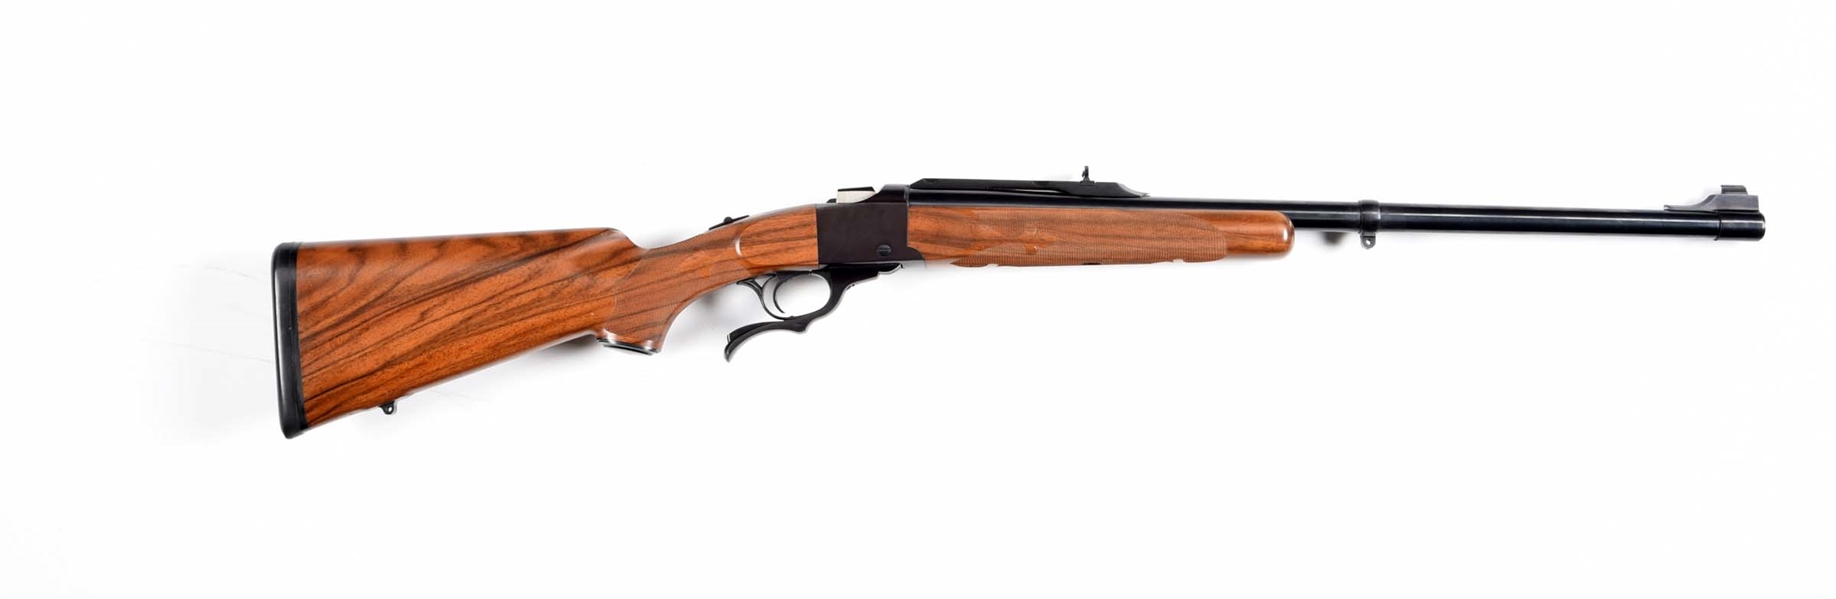 (M) ATTRACTIVE RUGER NO. 1 SINGLE SHOT RIFLE IN .375 H&H MAG.